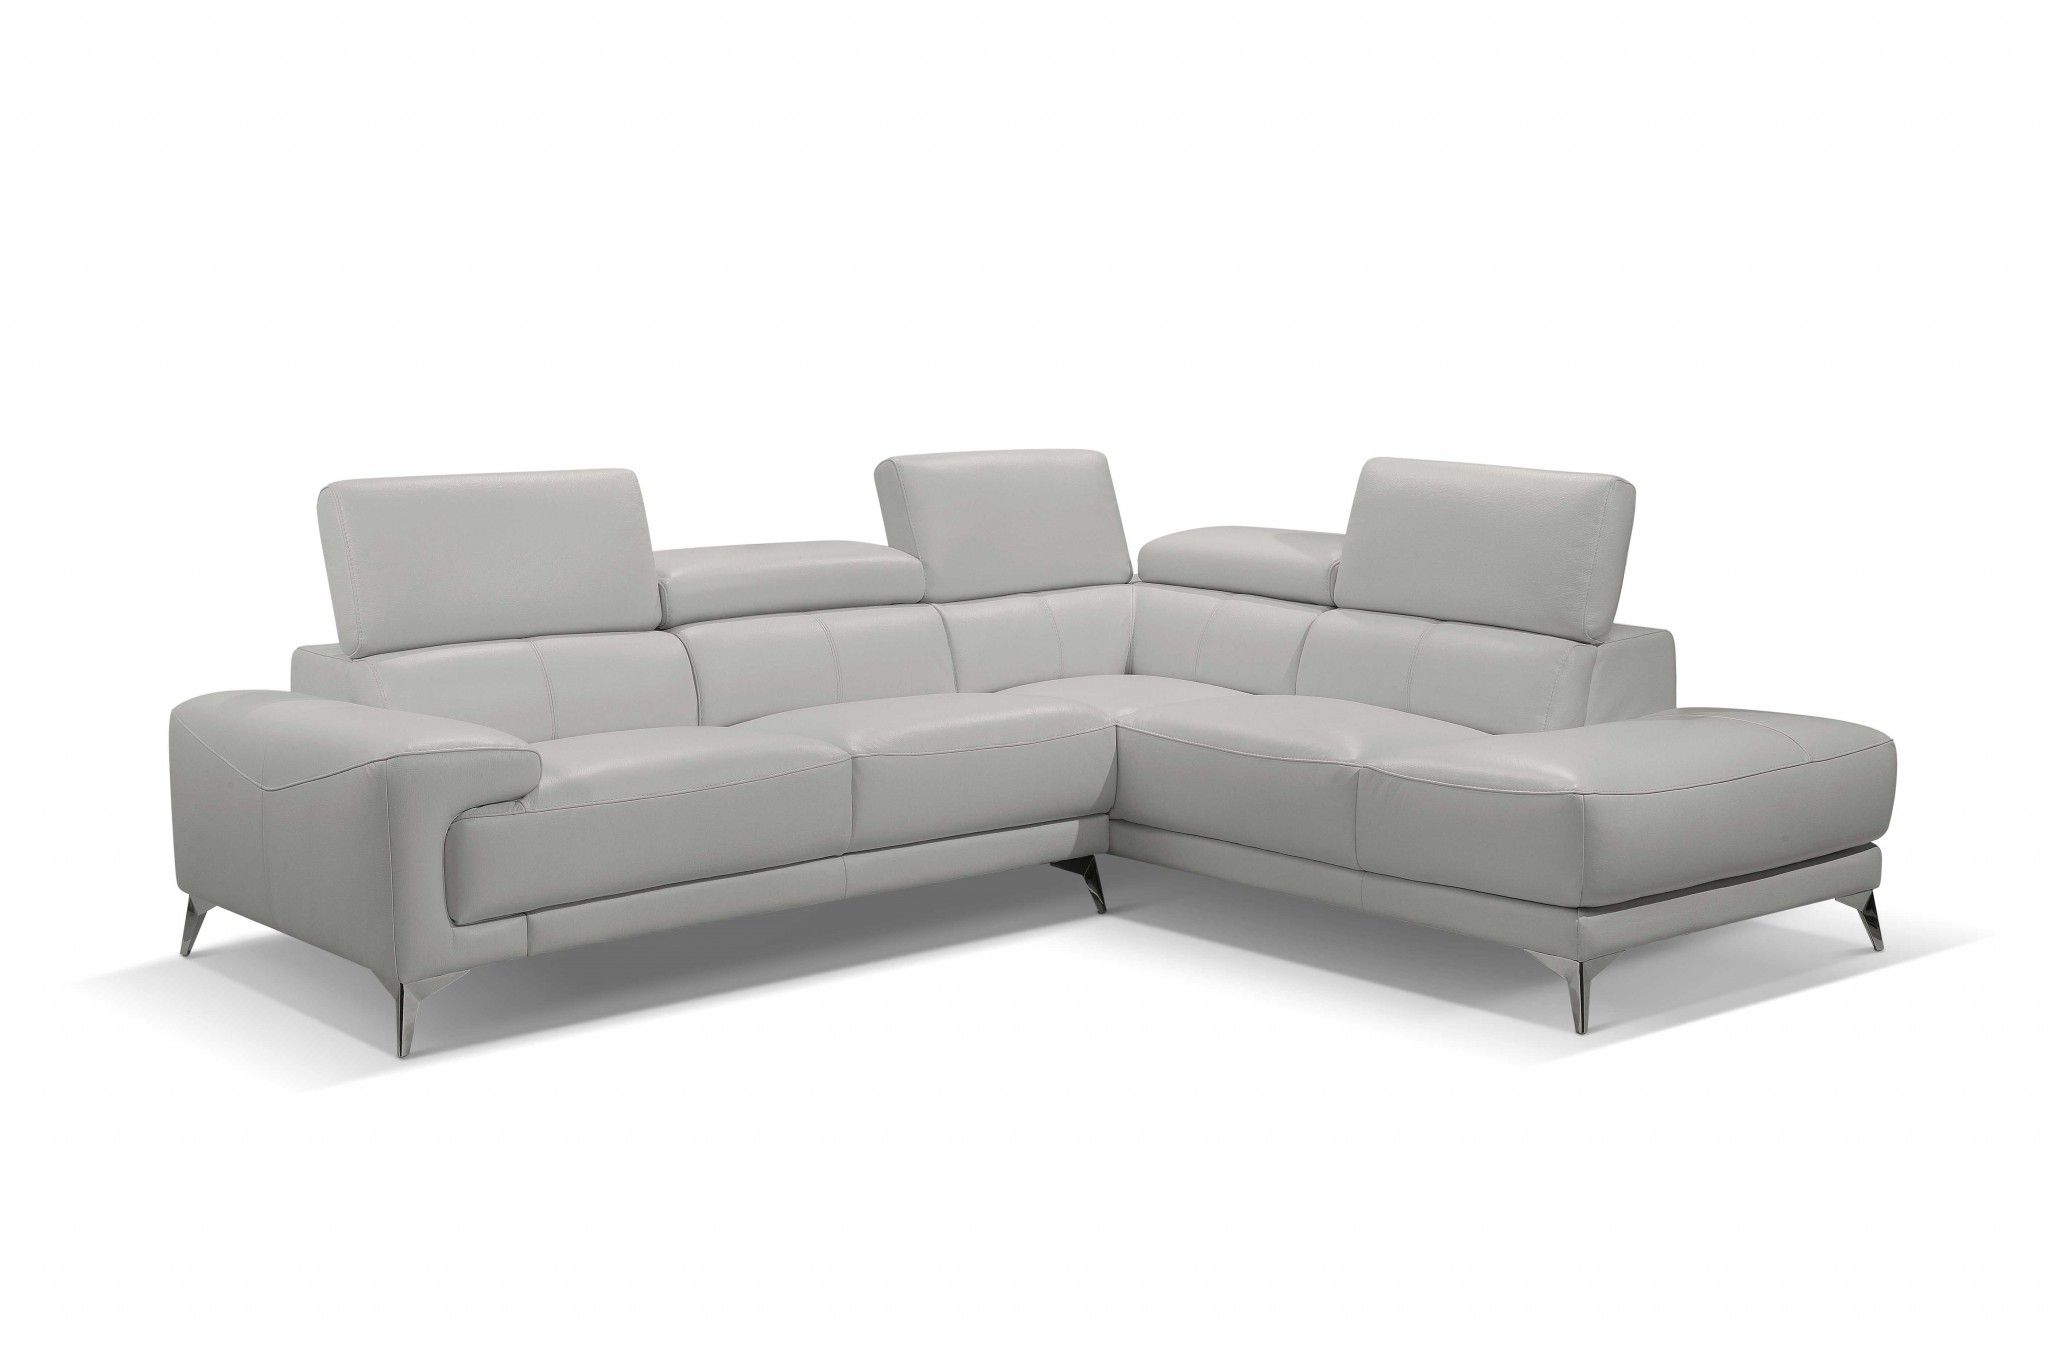 Sectional, Chaise On Right When Facing, White Top Grain Pertaining To [%Matilda 100% Top Grain Leather Chaise Sectional Sofas|Matilda 100% Top Grain Leather Chaise Sectional Sofas%] (View 12 of 15)